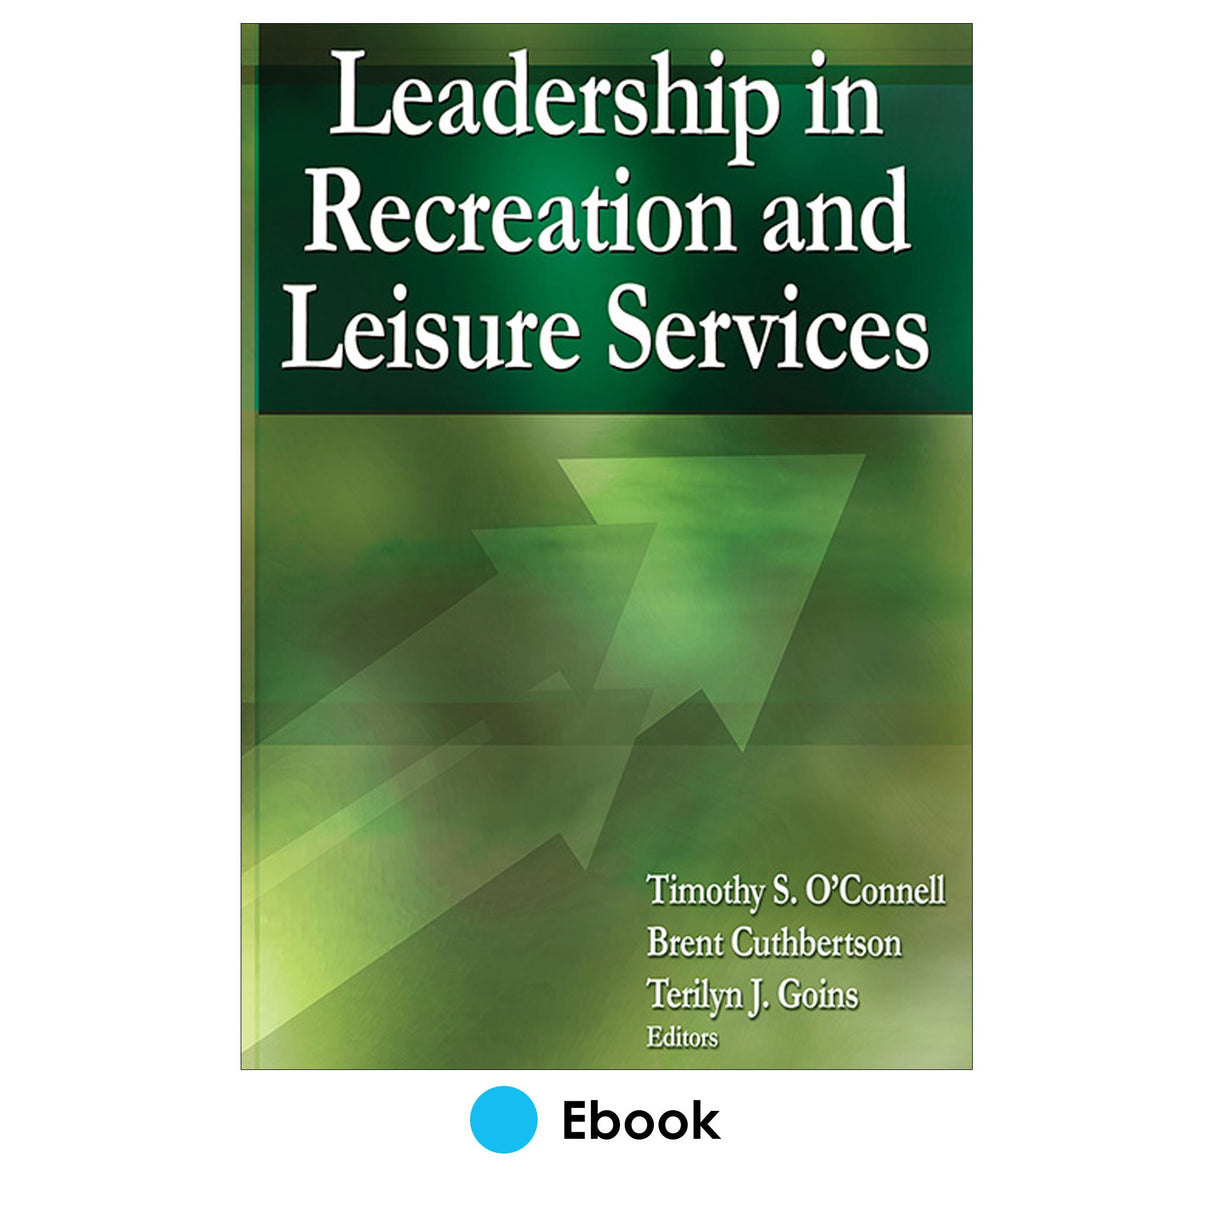 Leadership in Recreation and Leisure Services PDF